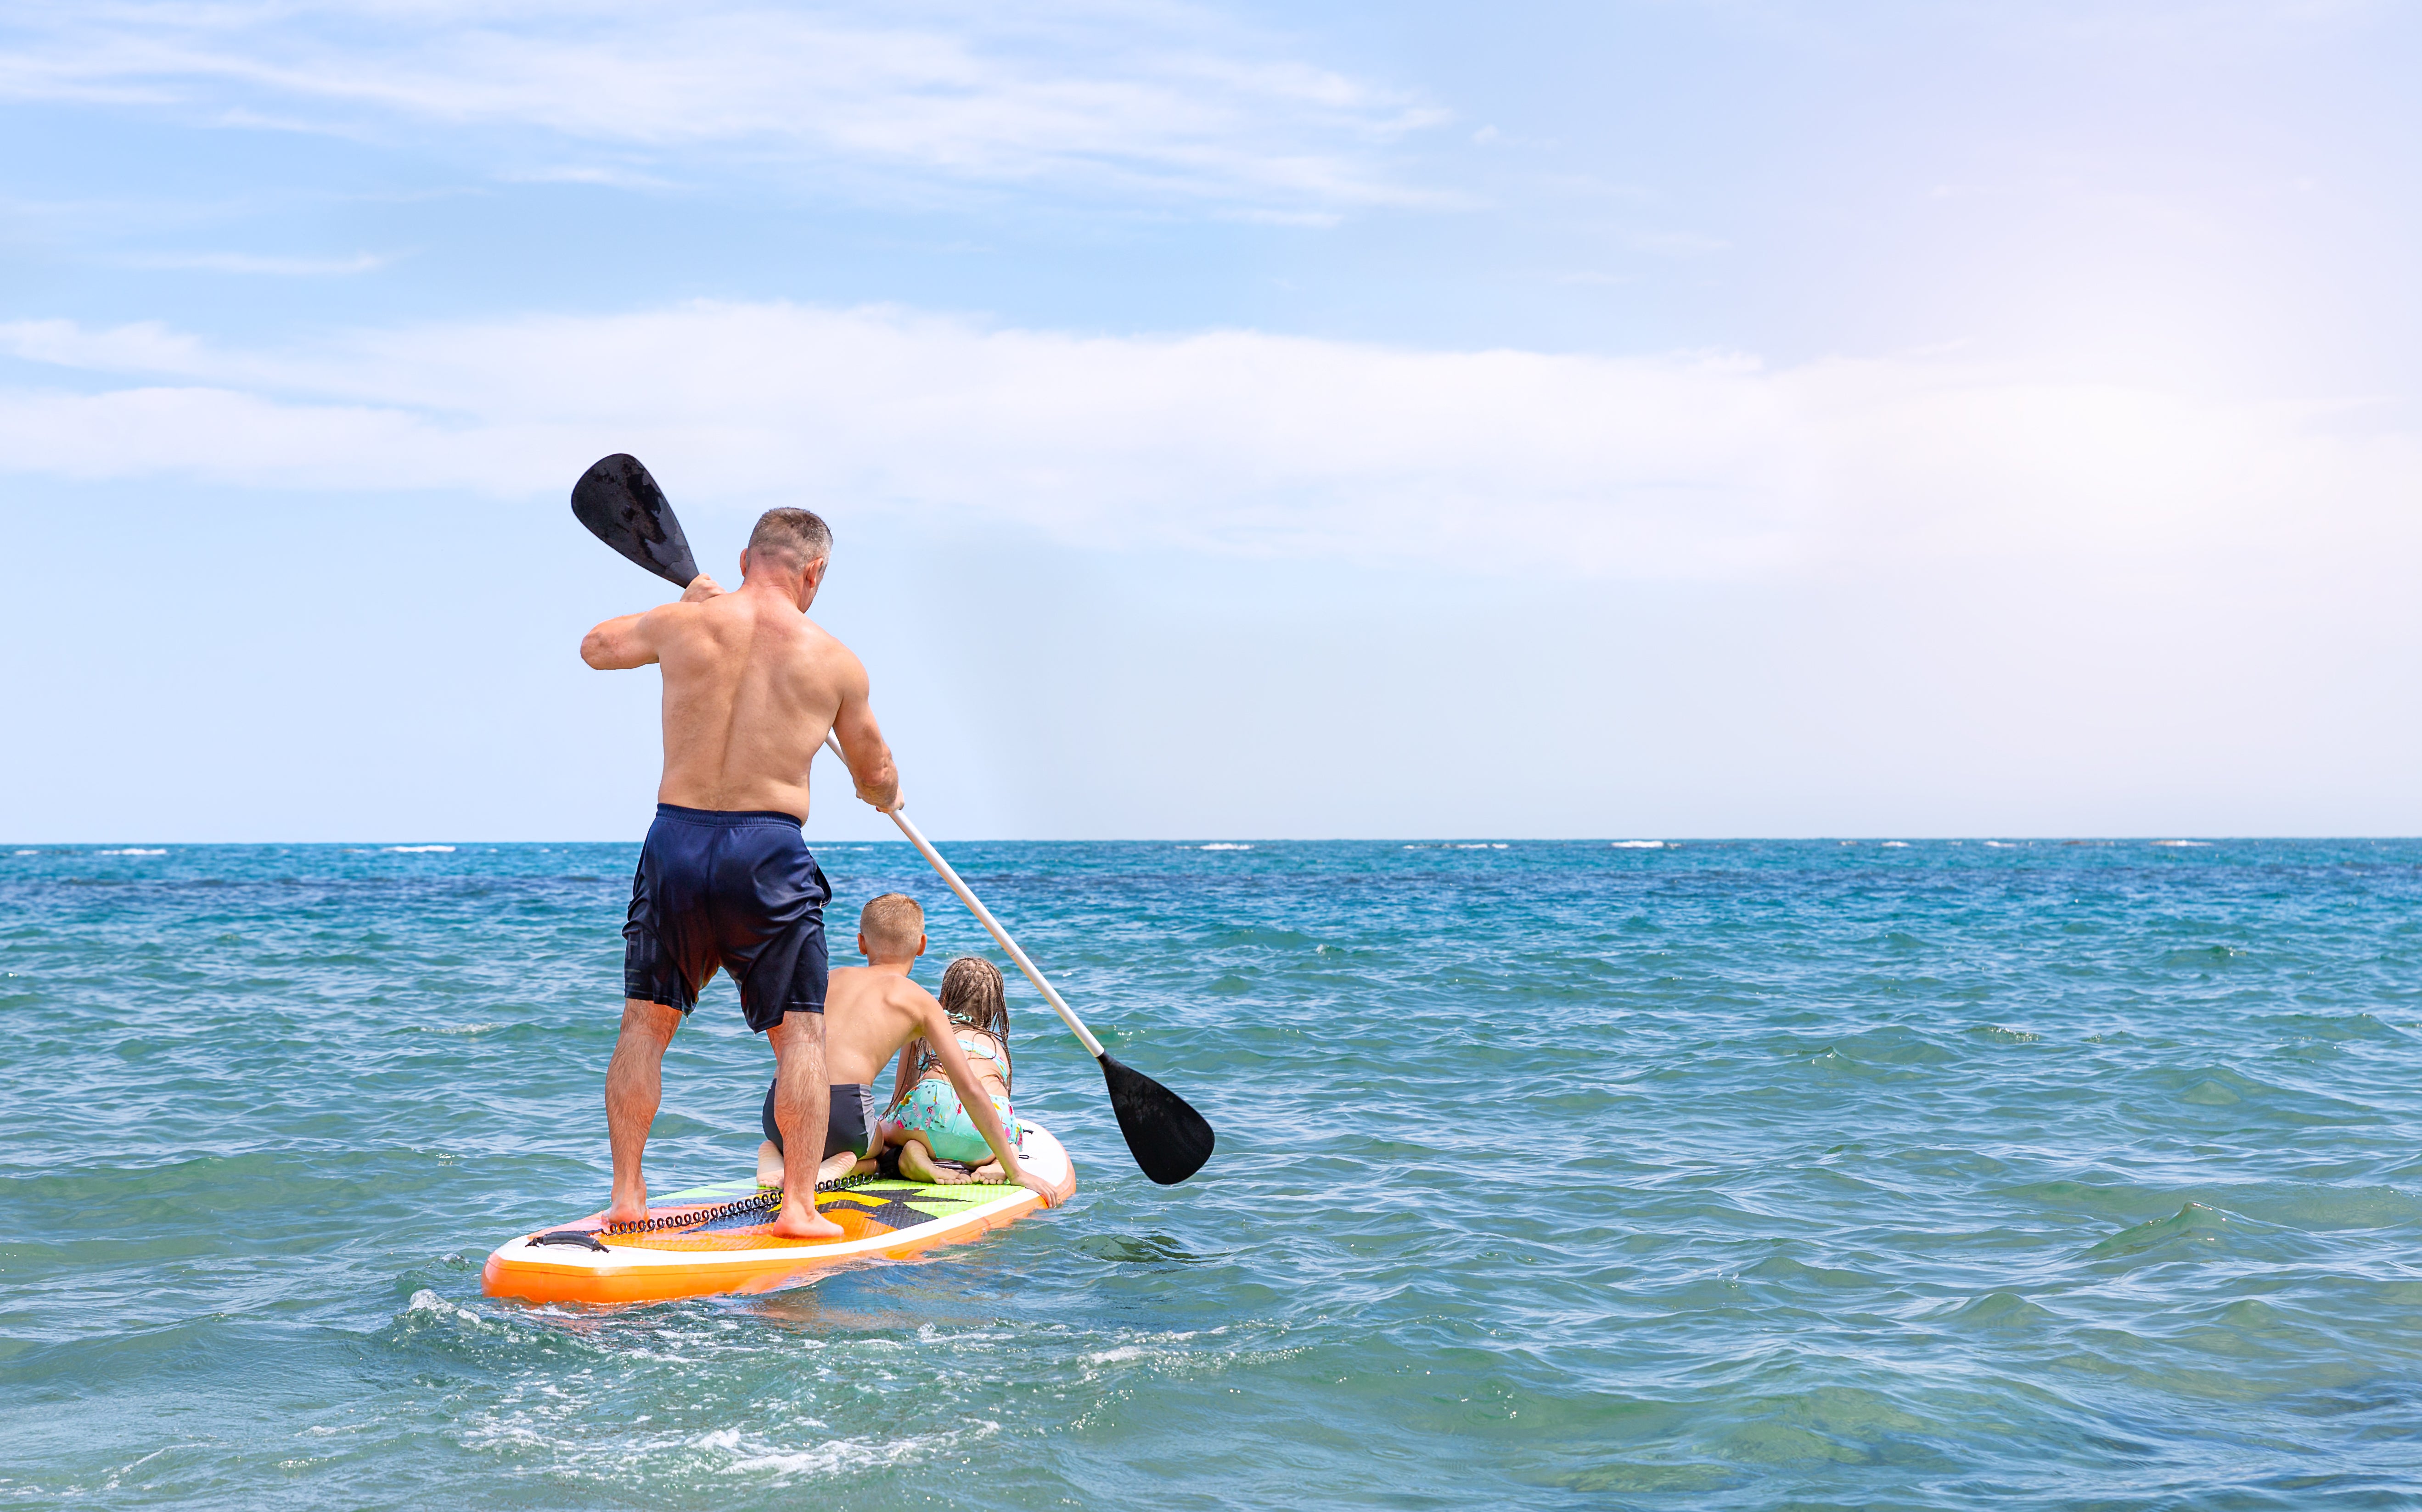 Surf & Water Sports, Things to Do